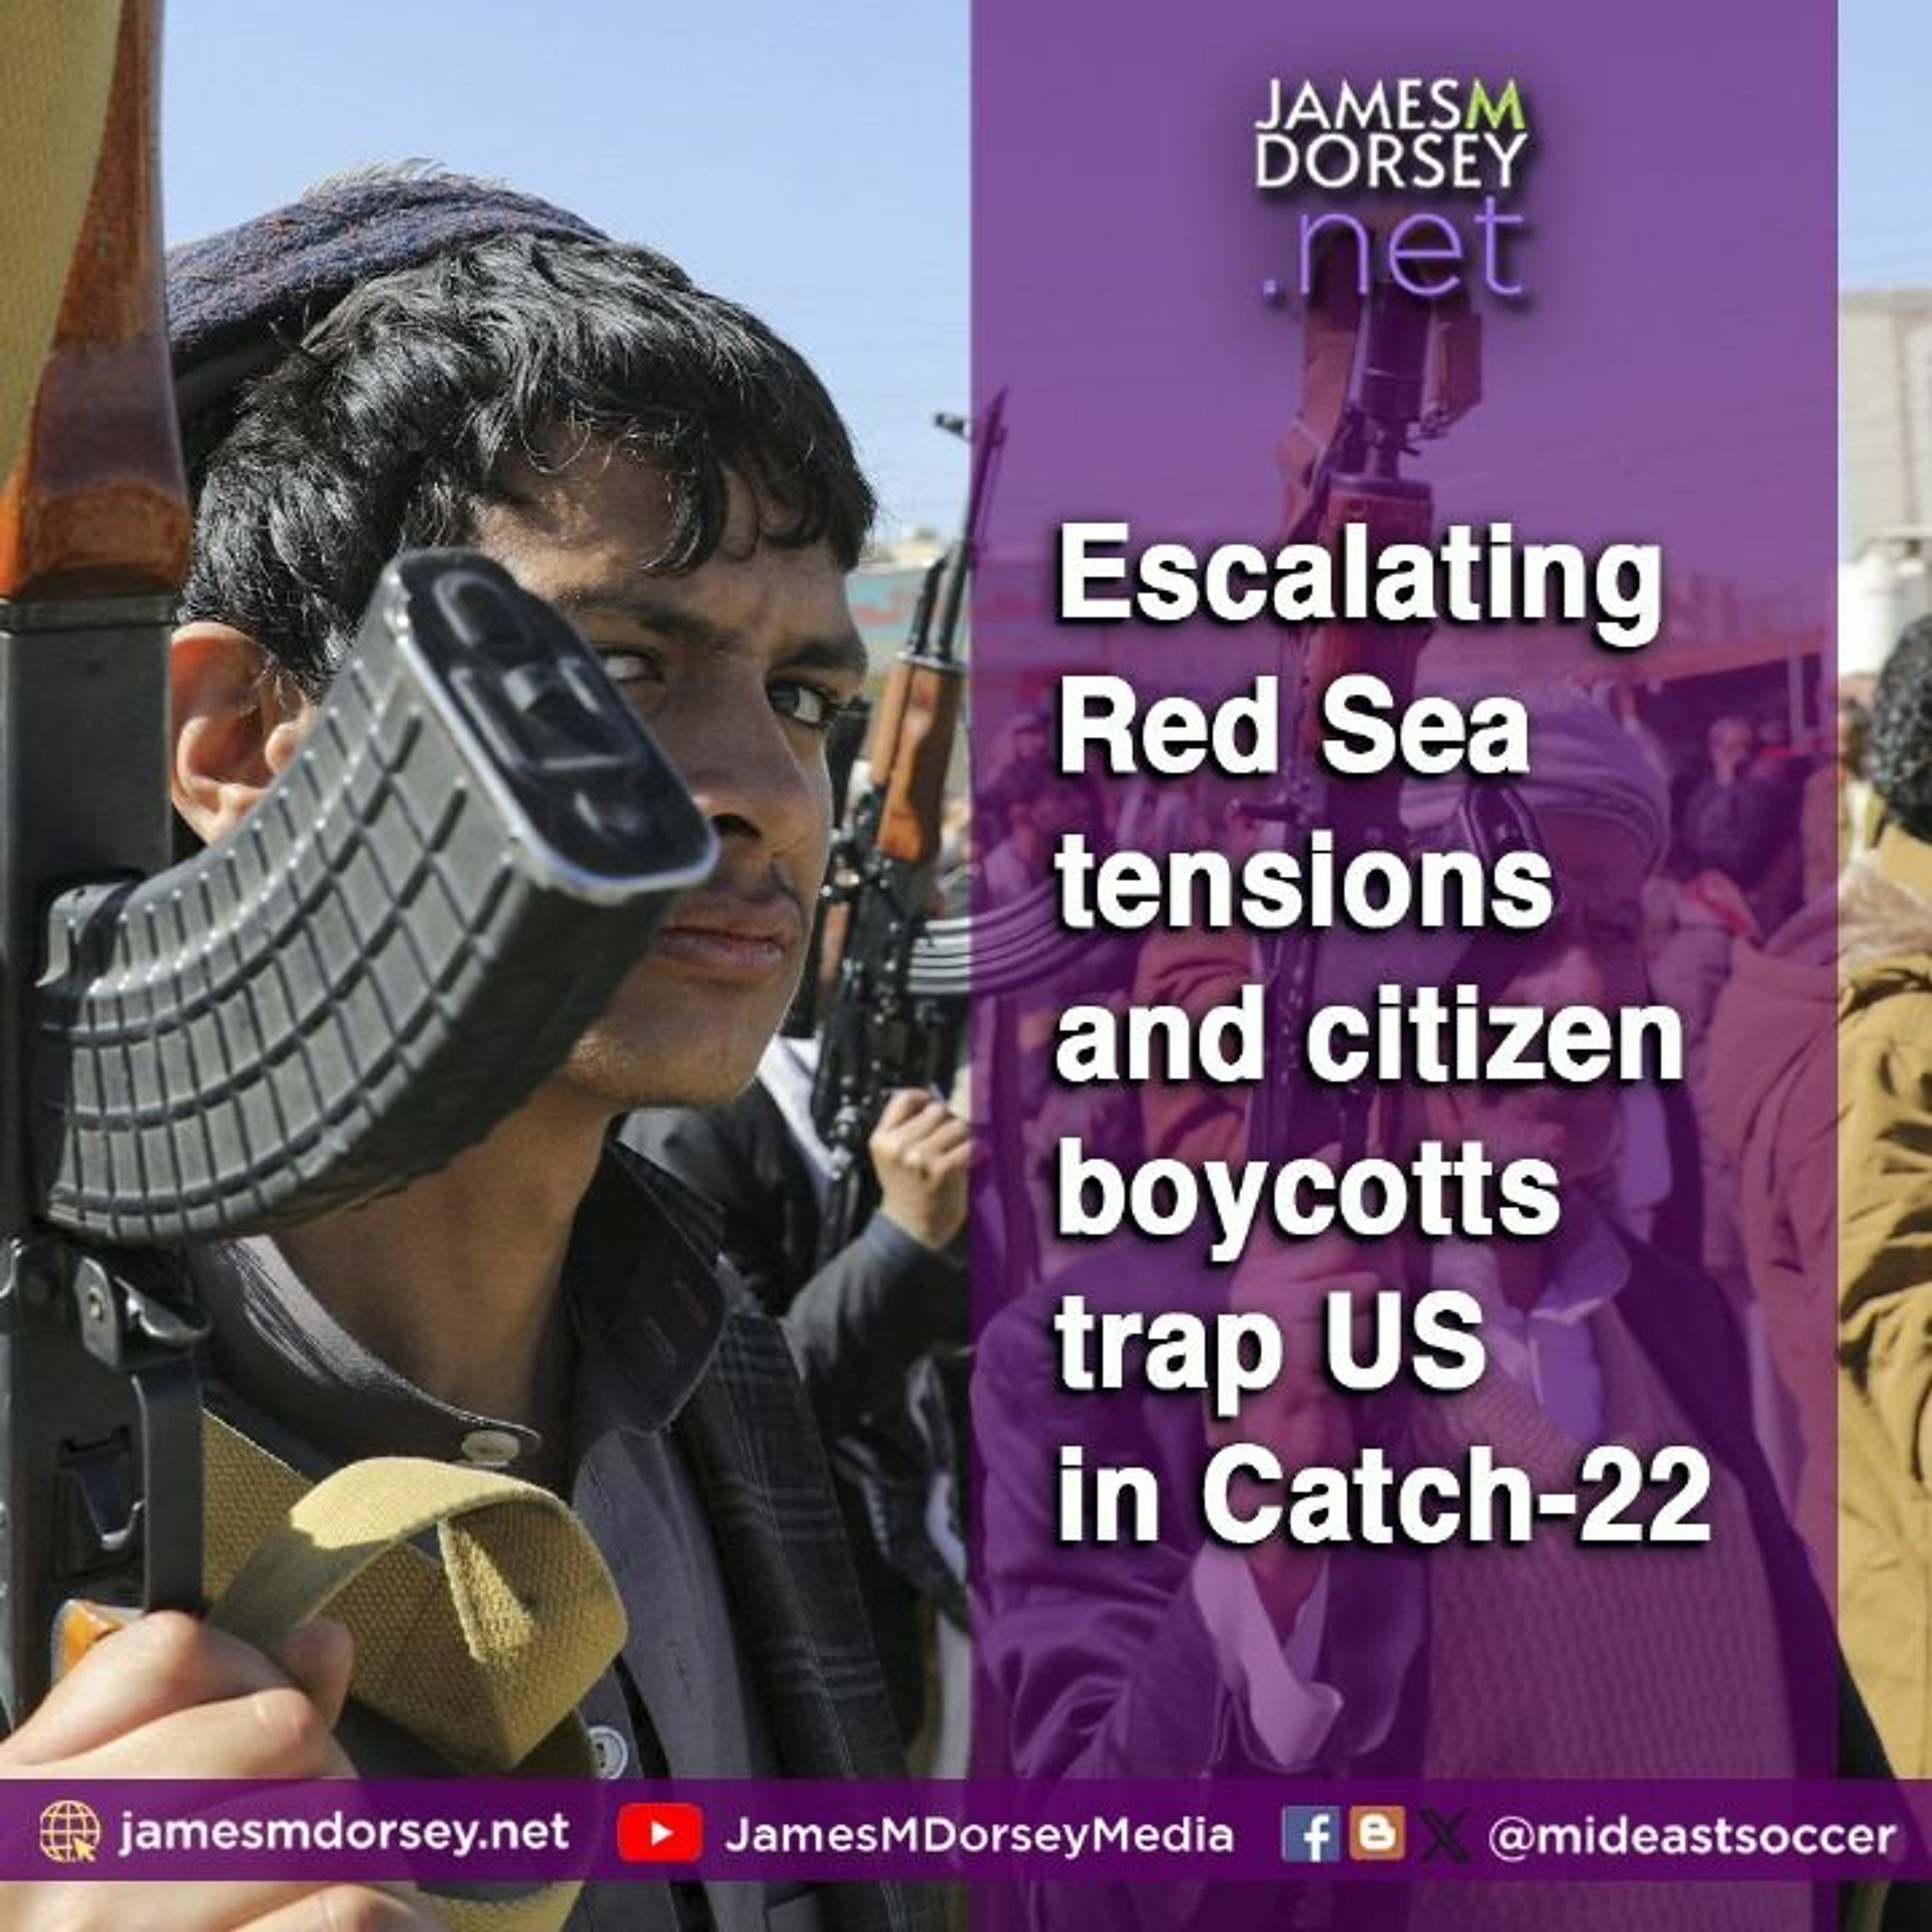 Escalating Red Sea Tensions And Citizen Boycotts Trap US In Catch - 22